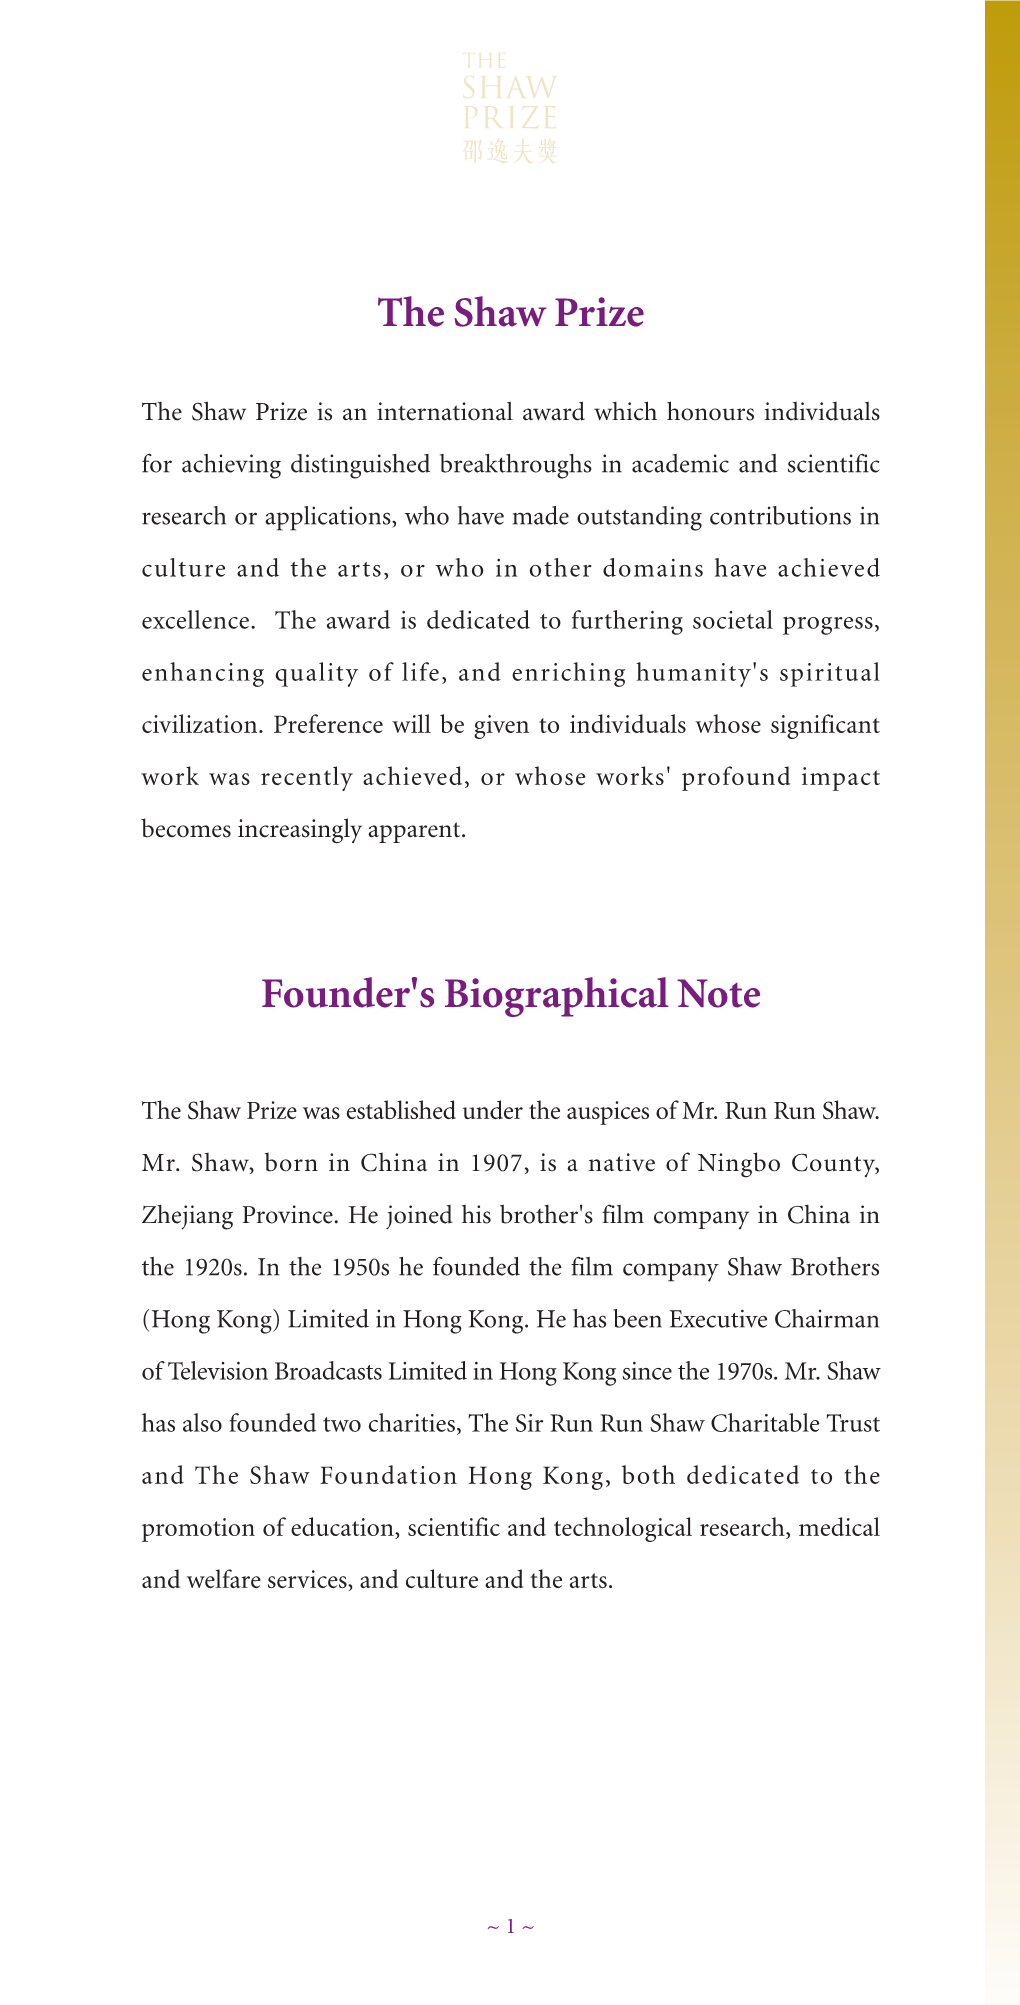 The Shaw Prize Founder's Biographical Note